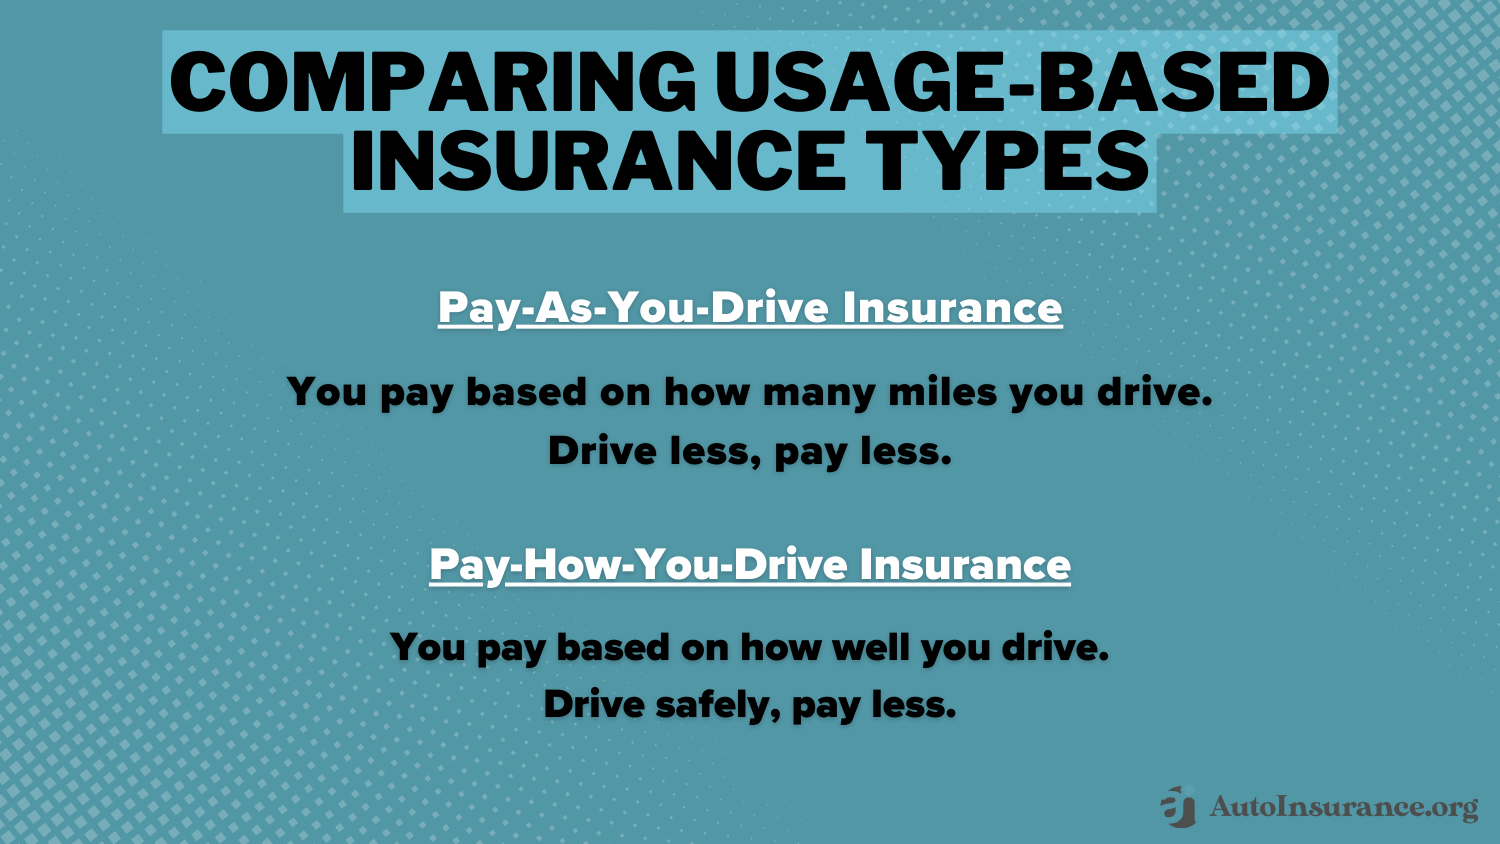 Allstate Milewise Review: Comparing Usage-Based Insurance Types